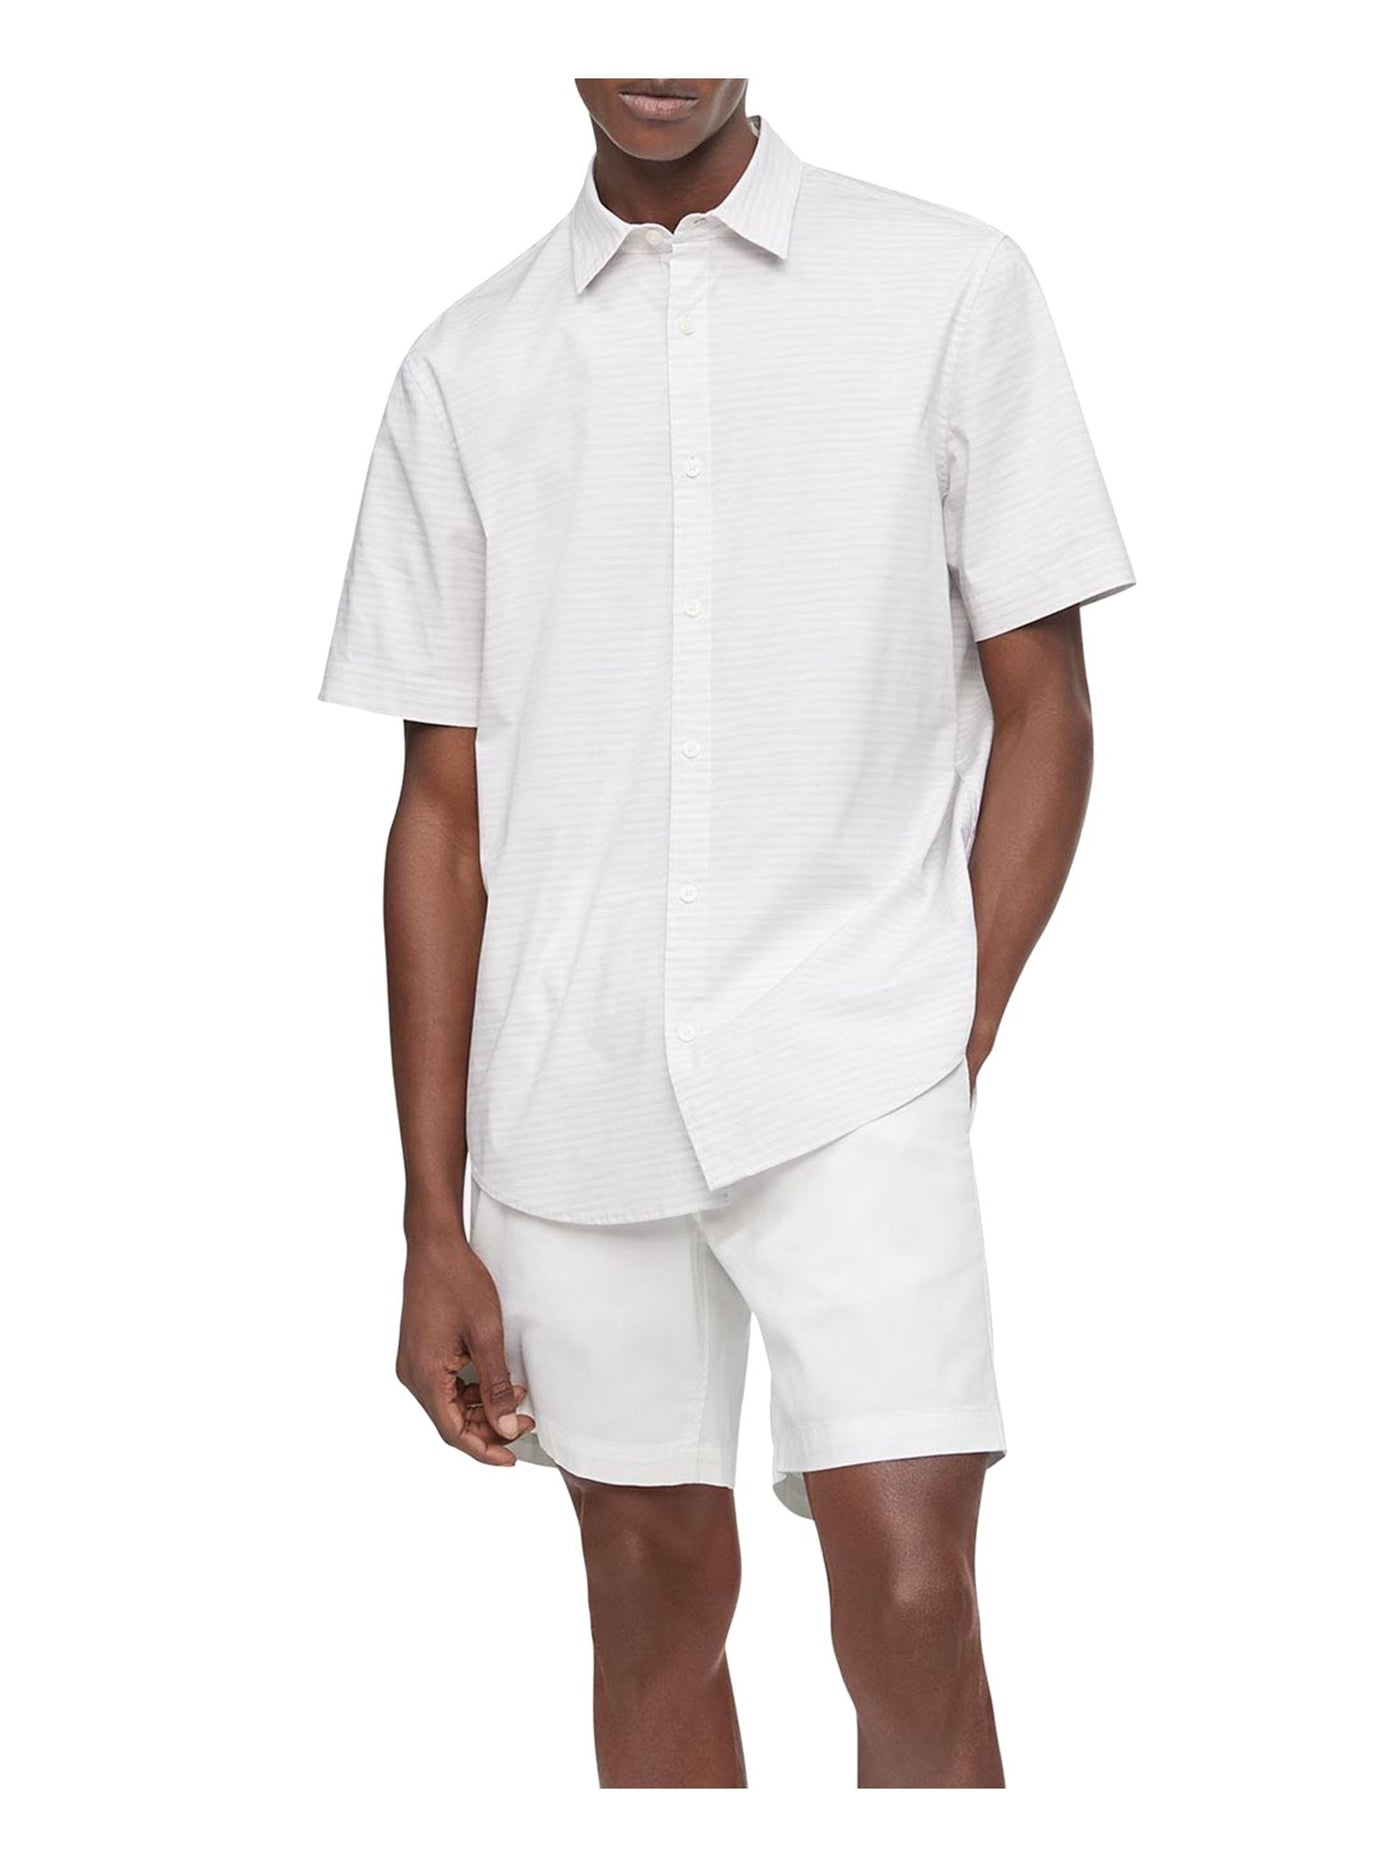 CALVIN KLEIN Mens White Short Sleeve Classic Fit Button Down Stretch Casual Shirt S